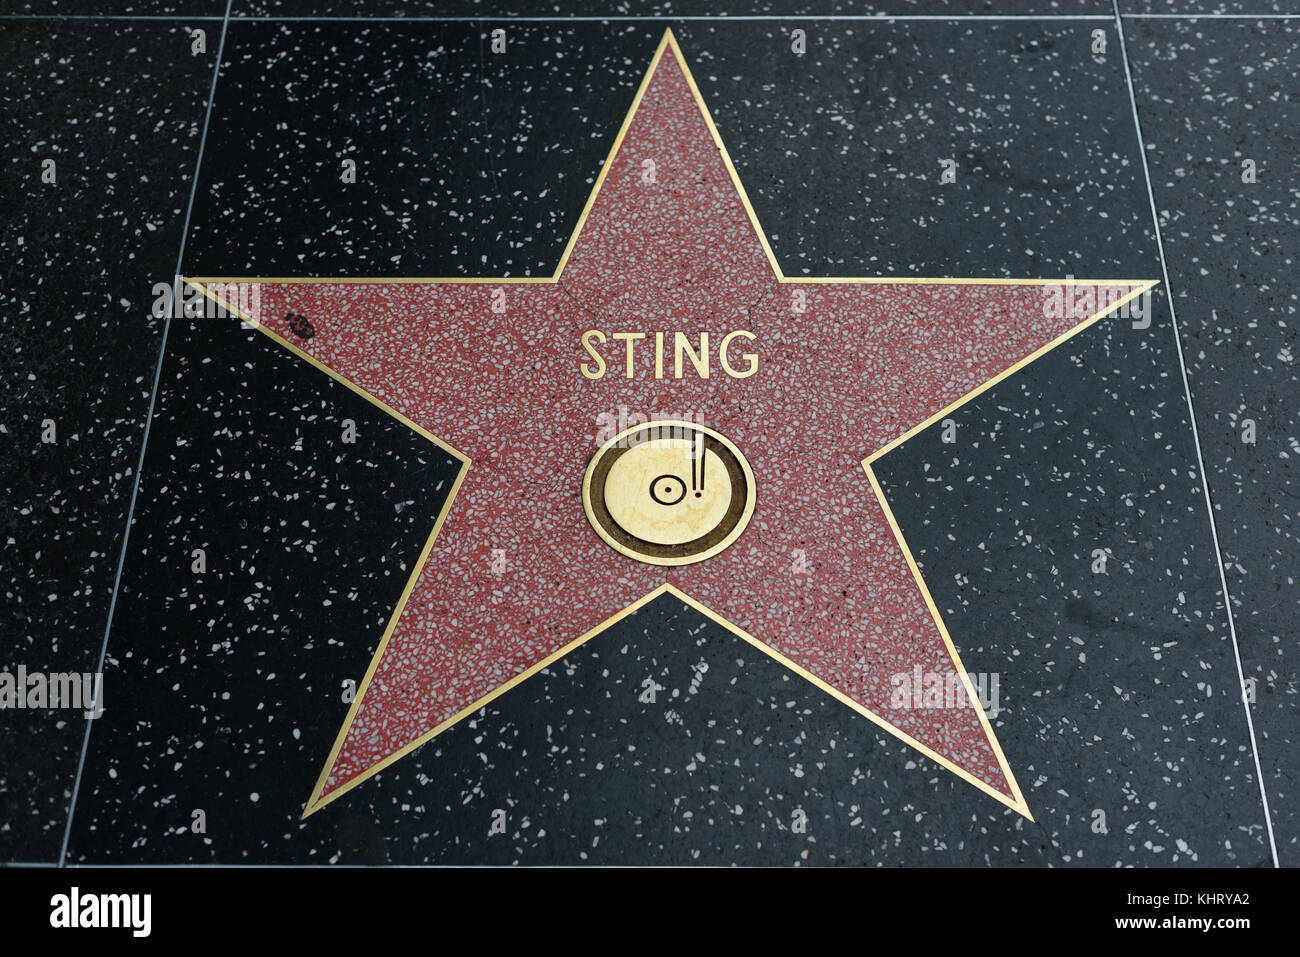 HOLLYWOOD, CA - DICEMBRE 06: Sting star sulla Hollywood Walk of Fame a Hollywood, California il 6 dicembre 2016. Foto Stock